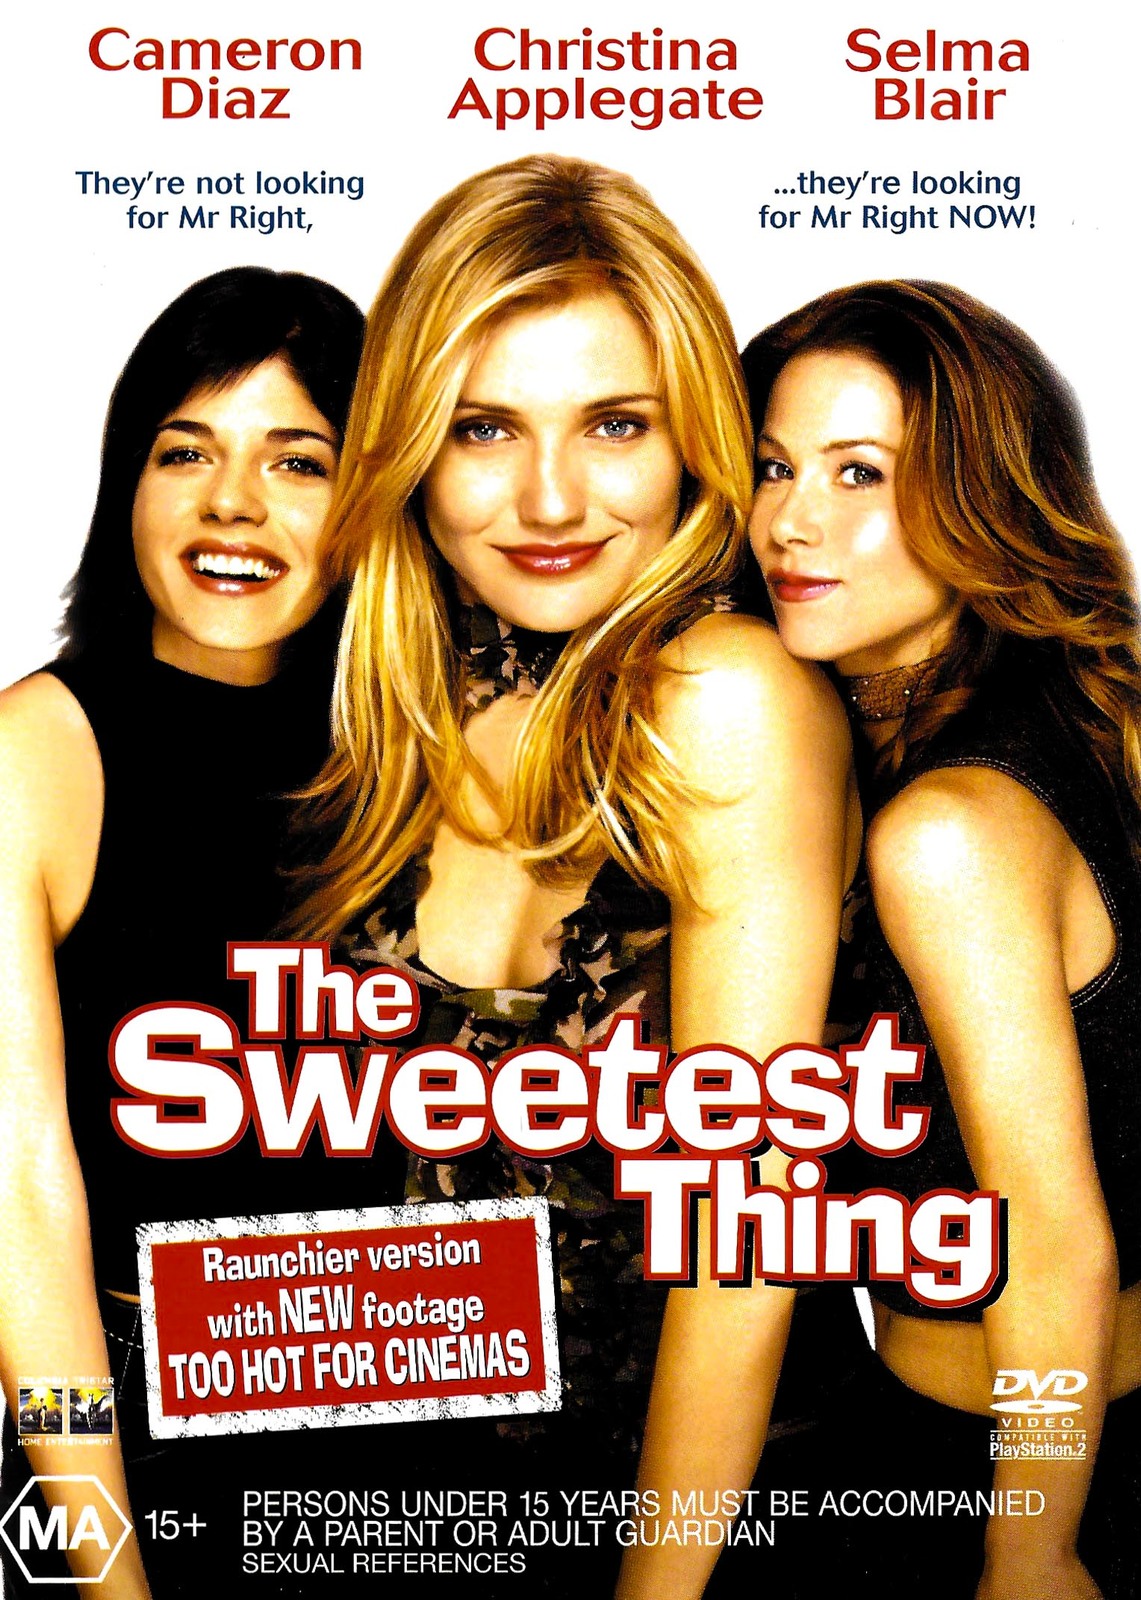 The Sweetest Thing Rare Dvd Aus Stock Comedy Excellent Ebay